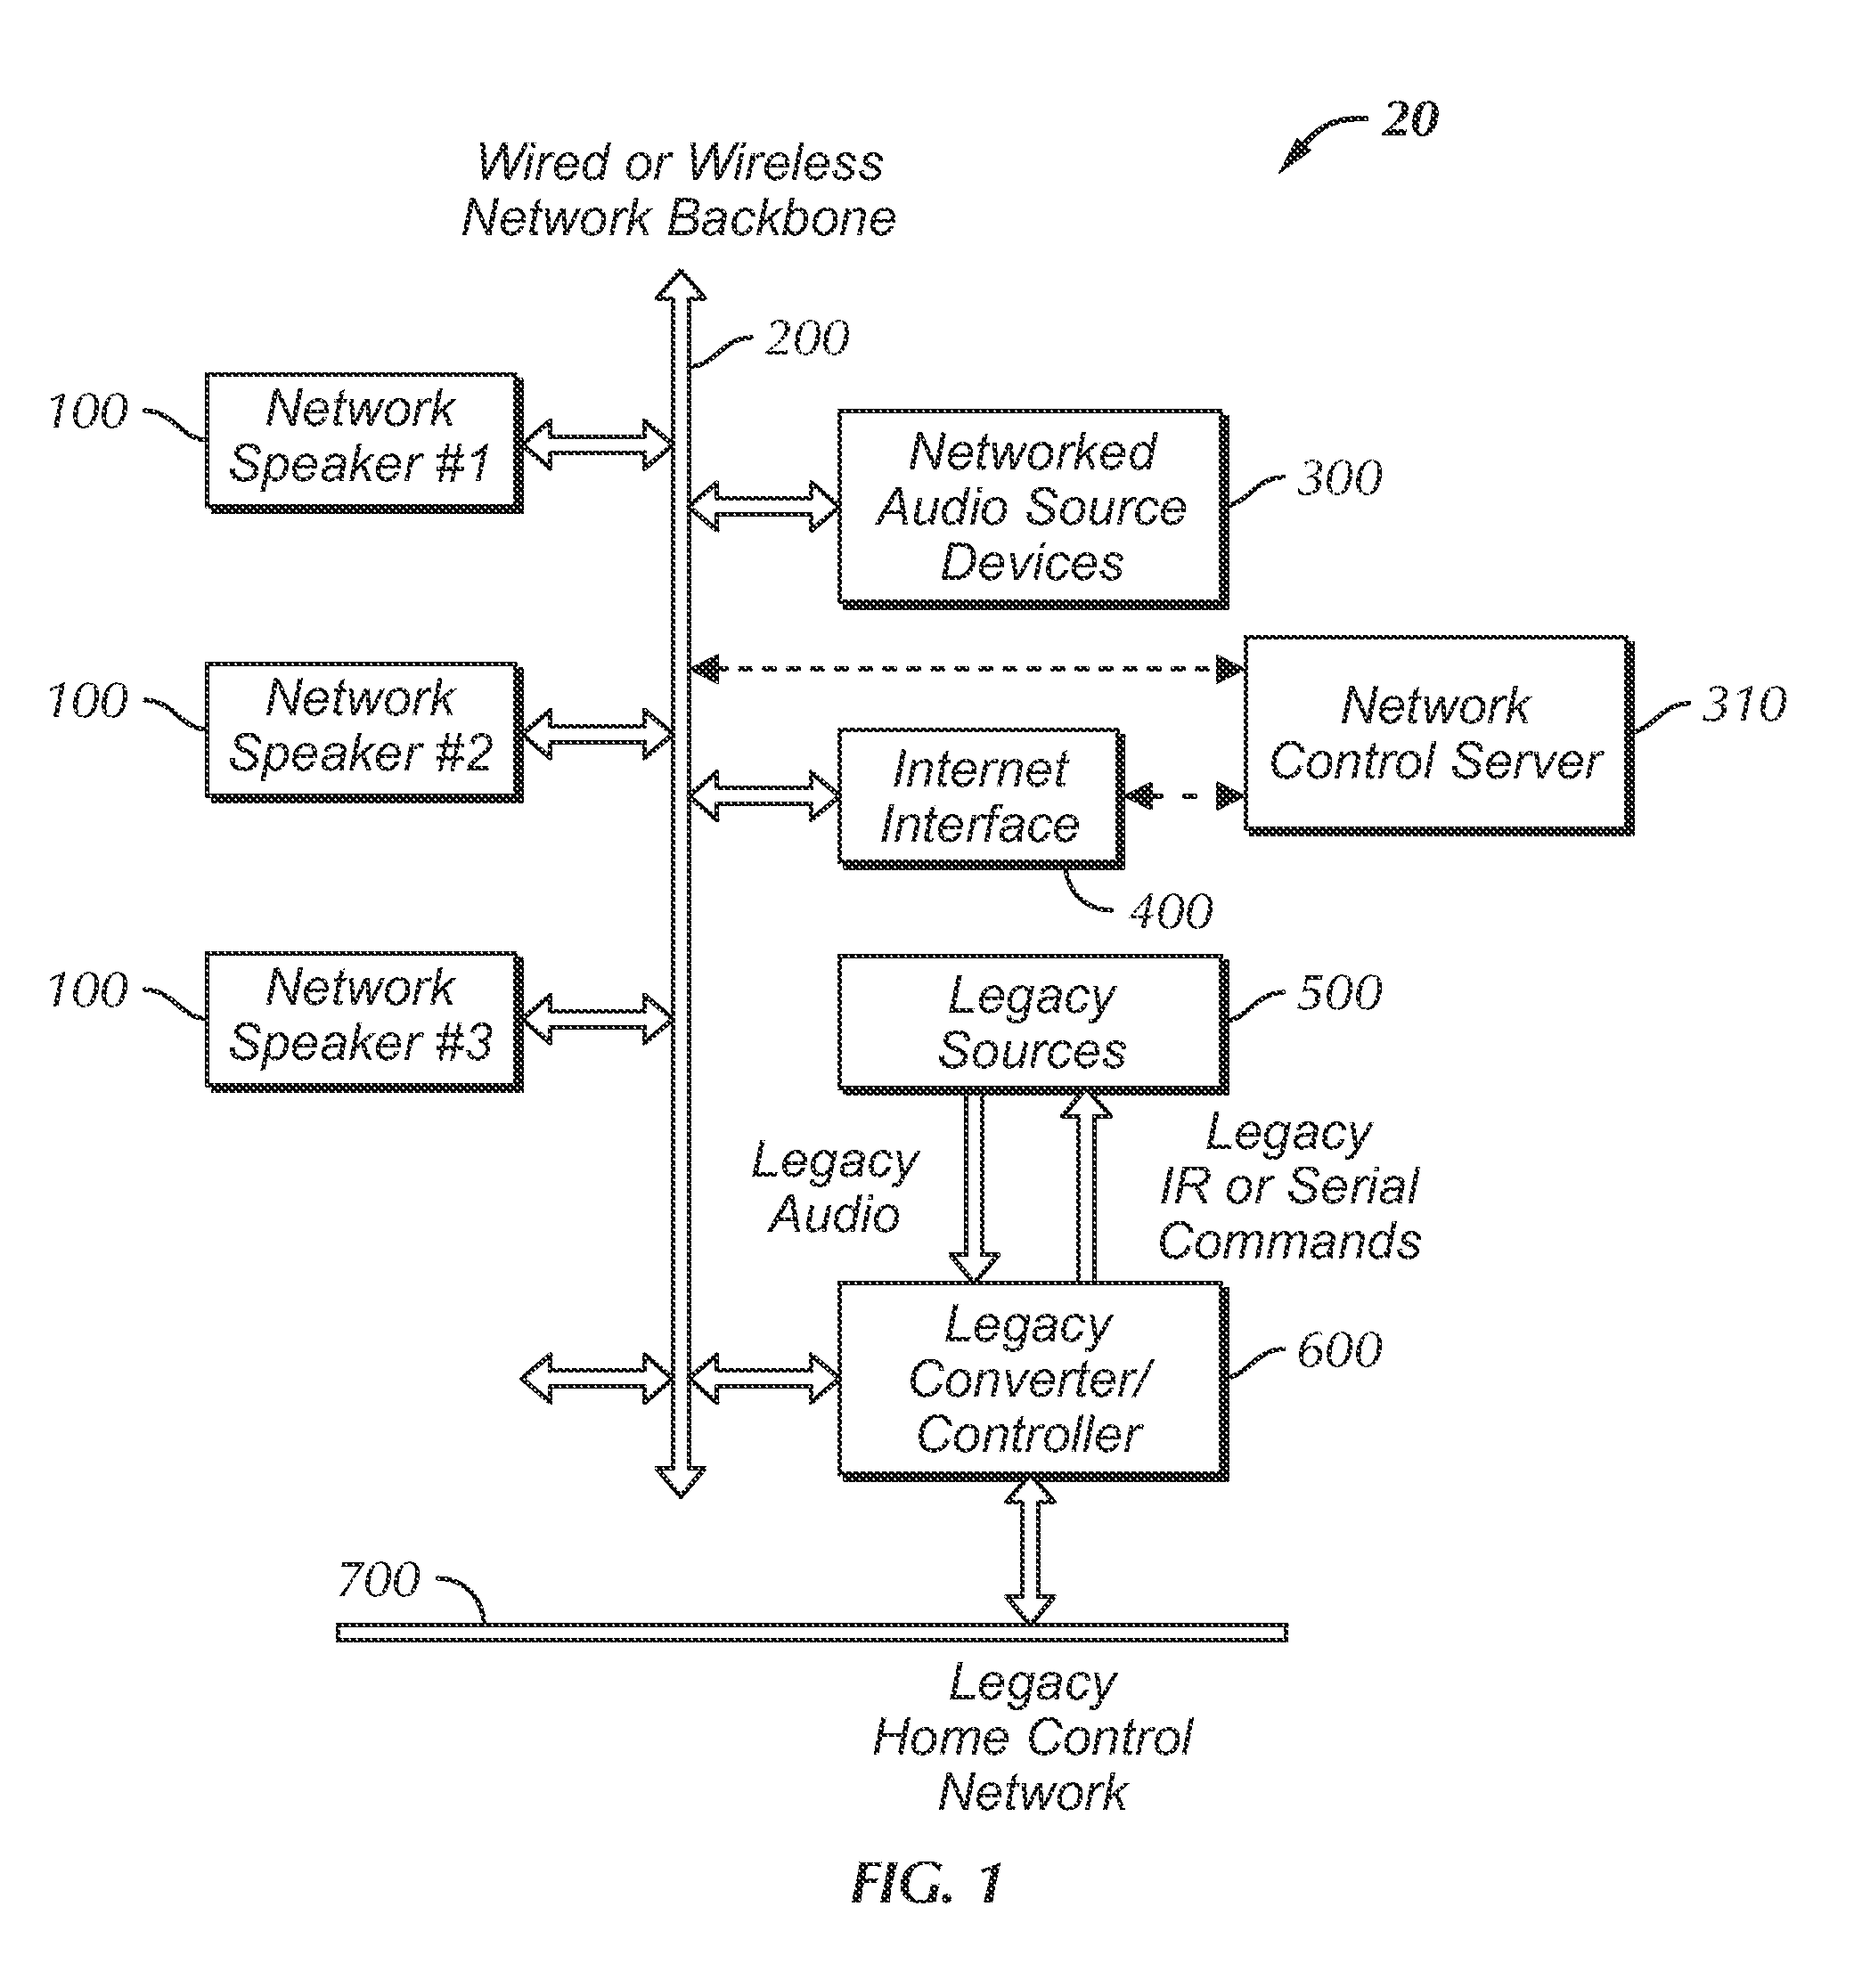 Legacy Audio Converter/Controller for an Audio Network Distribution System